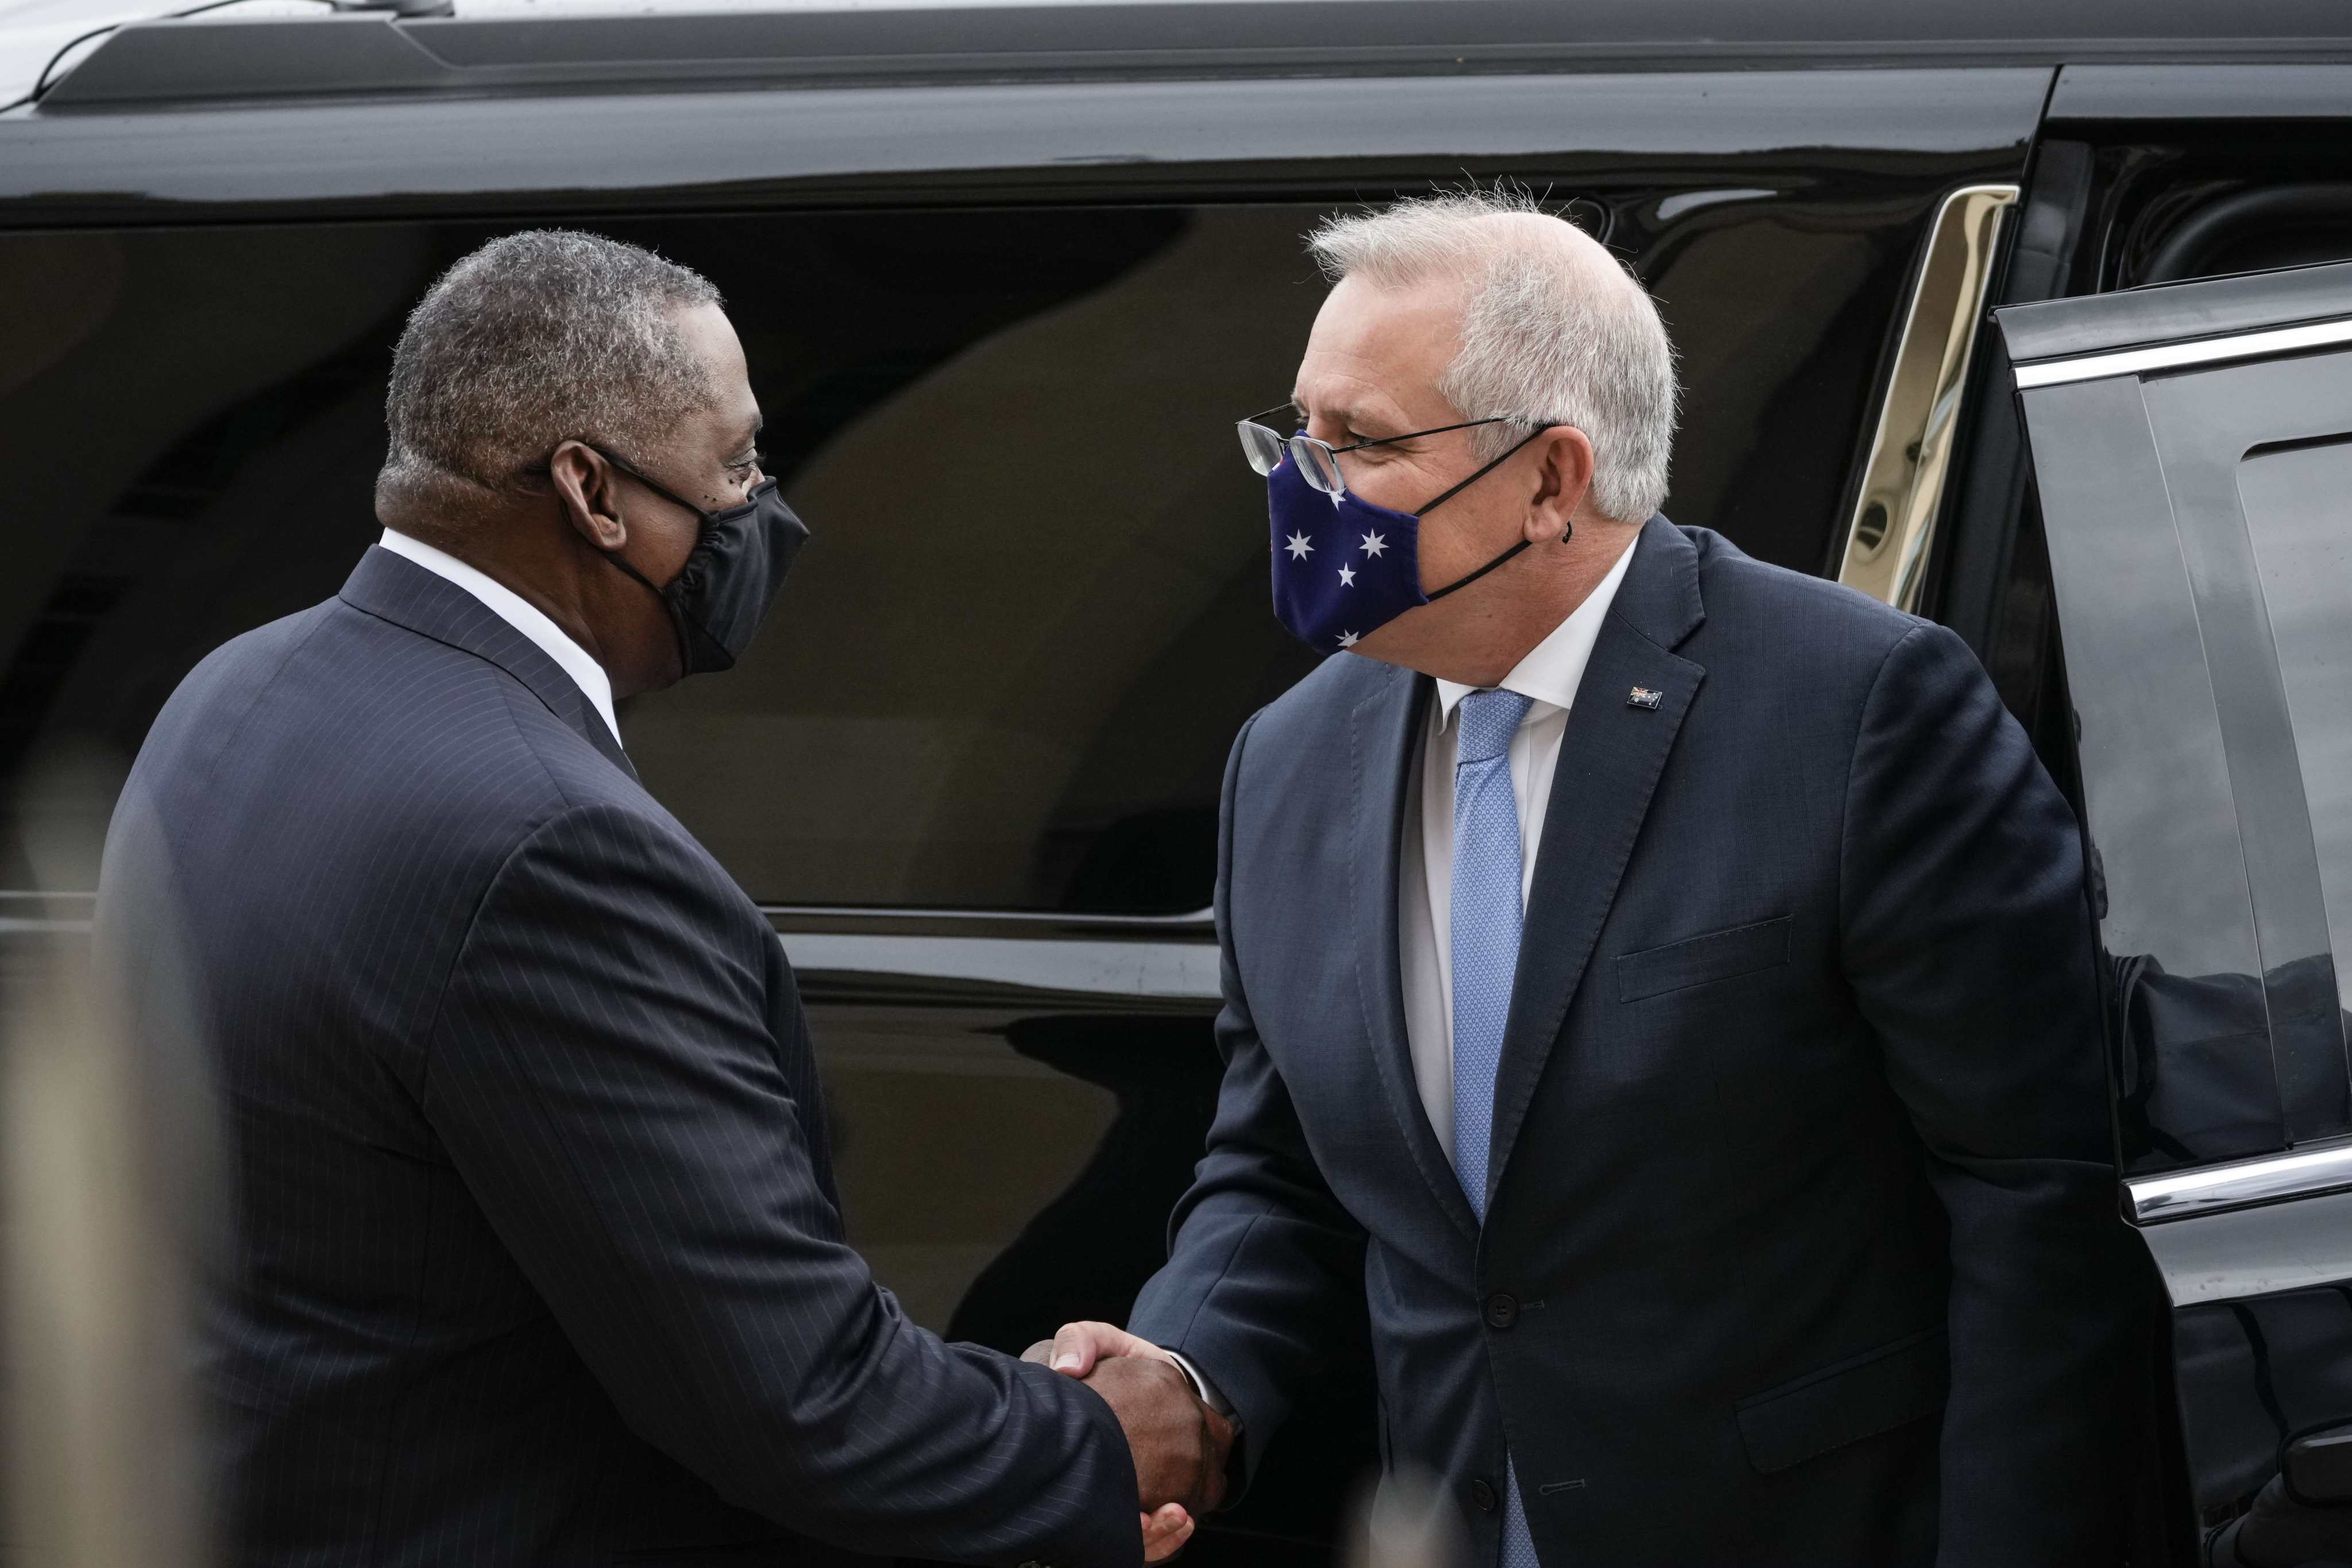 US Secretary of Defence Lloyd Austin (left) greets Australian Prime Minister Scott Morrison as he arrives at the Pentagon in Arlington, Virginia, on September 22. In mid-September, Australia, the United States and the United Kingdom announced a security pact, Aukus, to help Australia develop and deploy nuclear-powered submarines, in addition to other military cooperation.   Photo: AFP
 